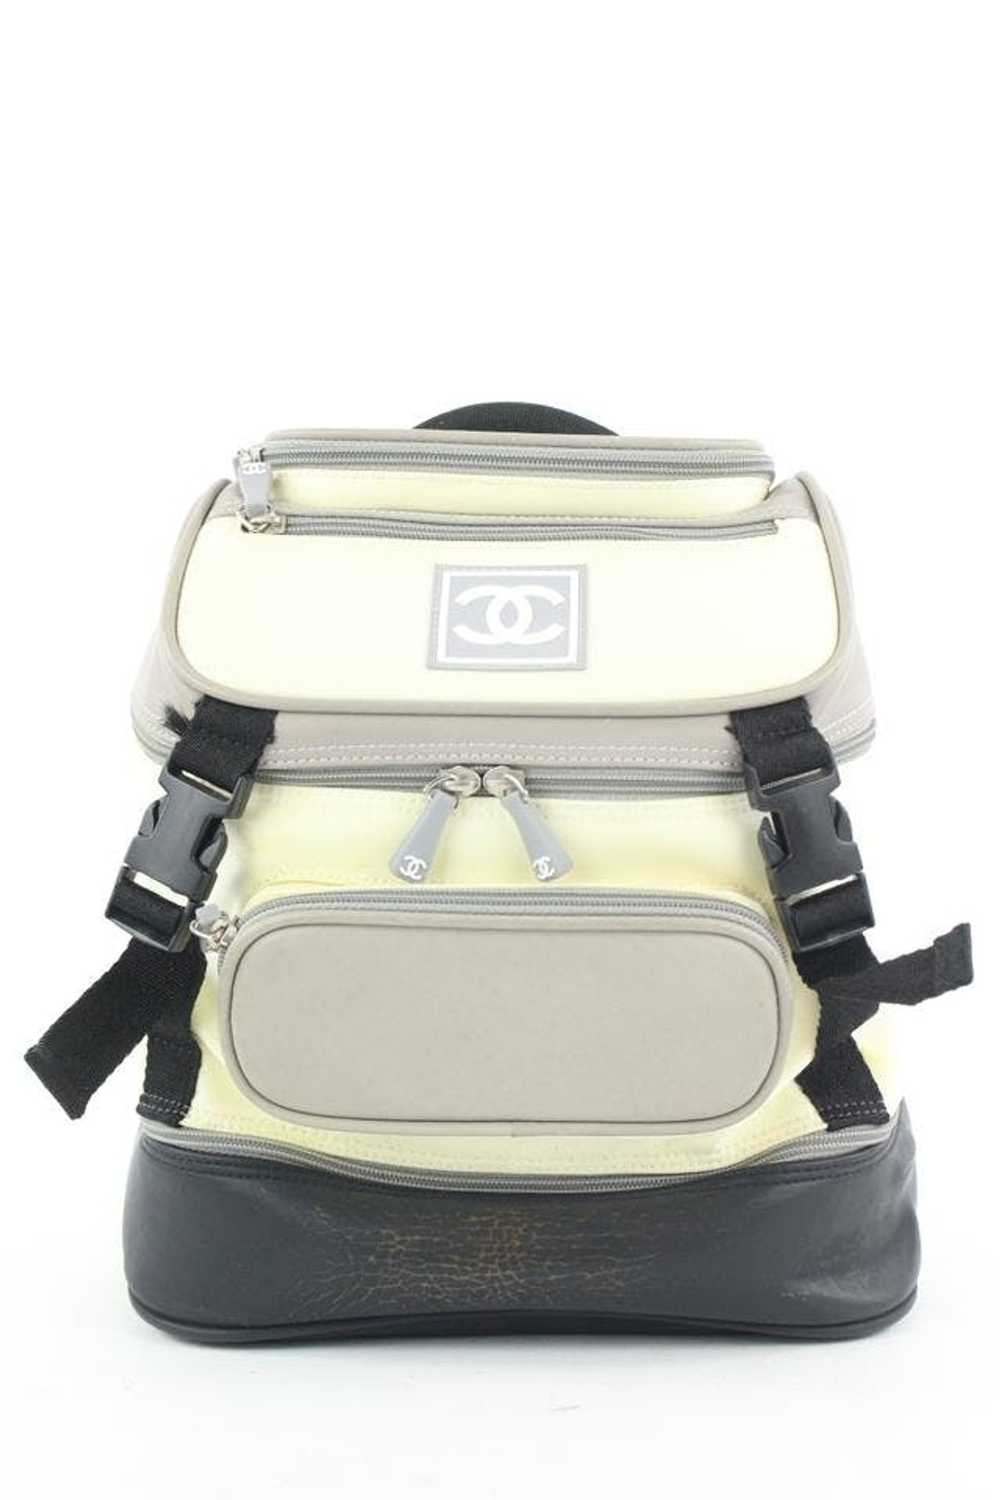 Chanel Chanel CC Logo Sports Backpack 322cas517 - image 1